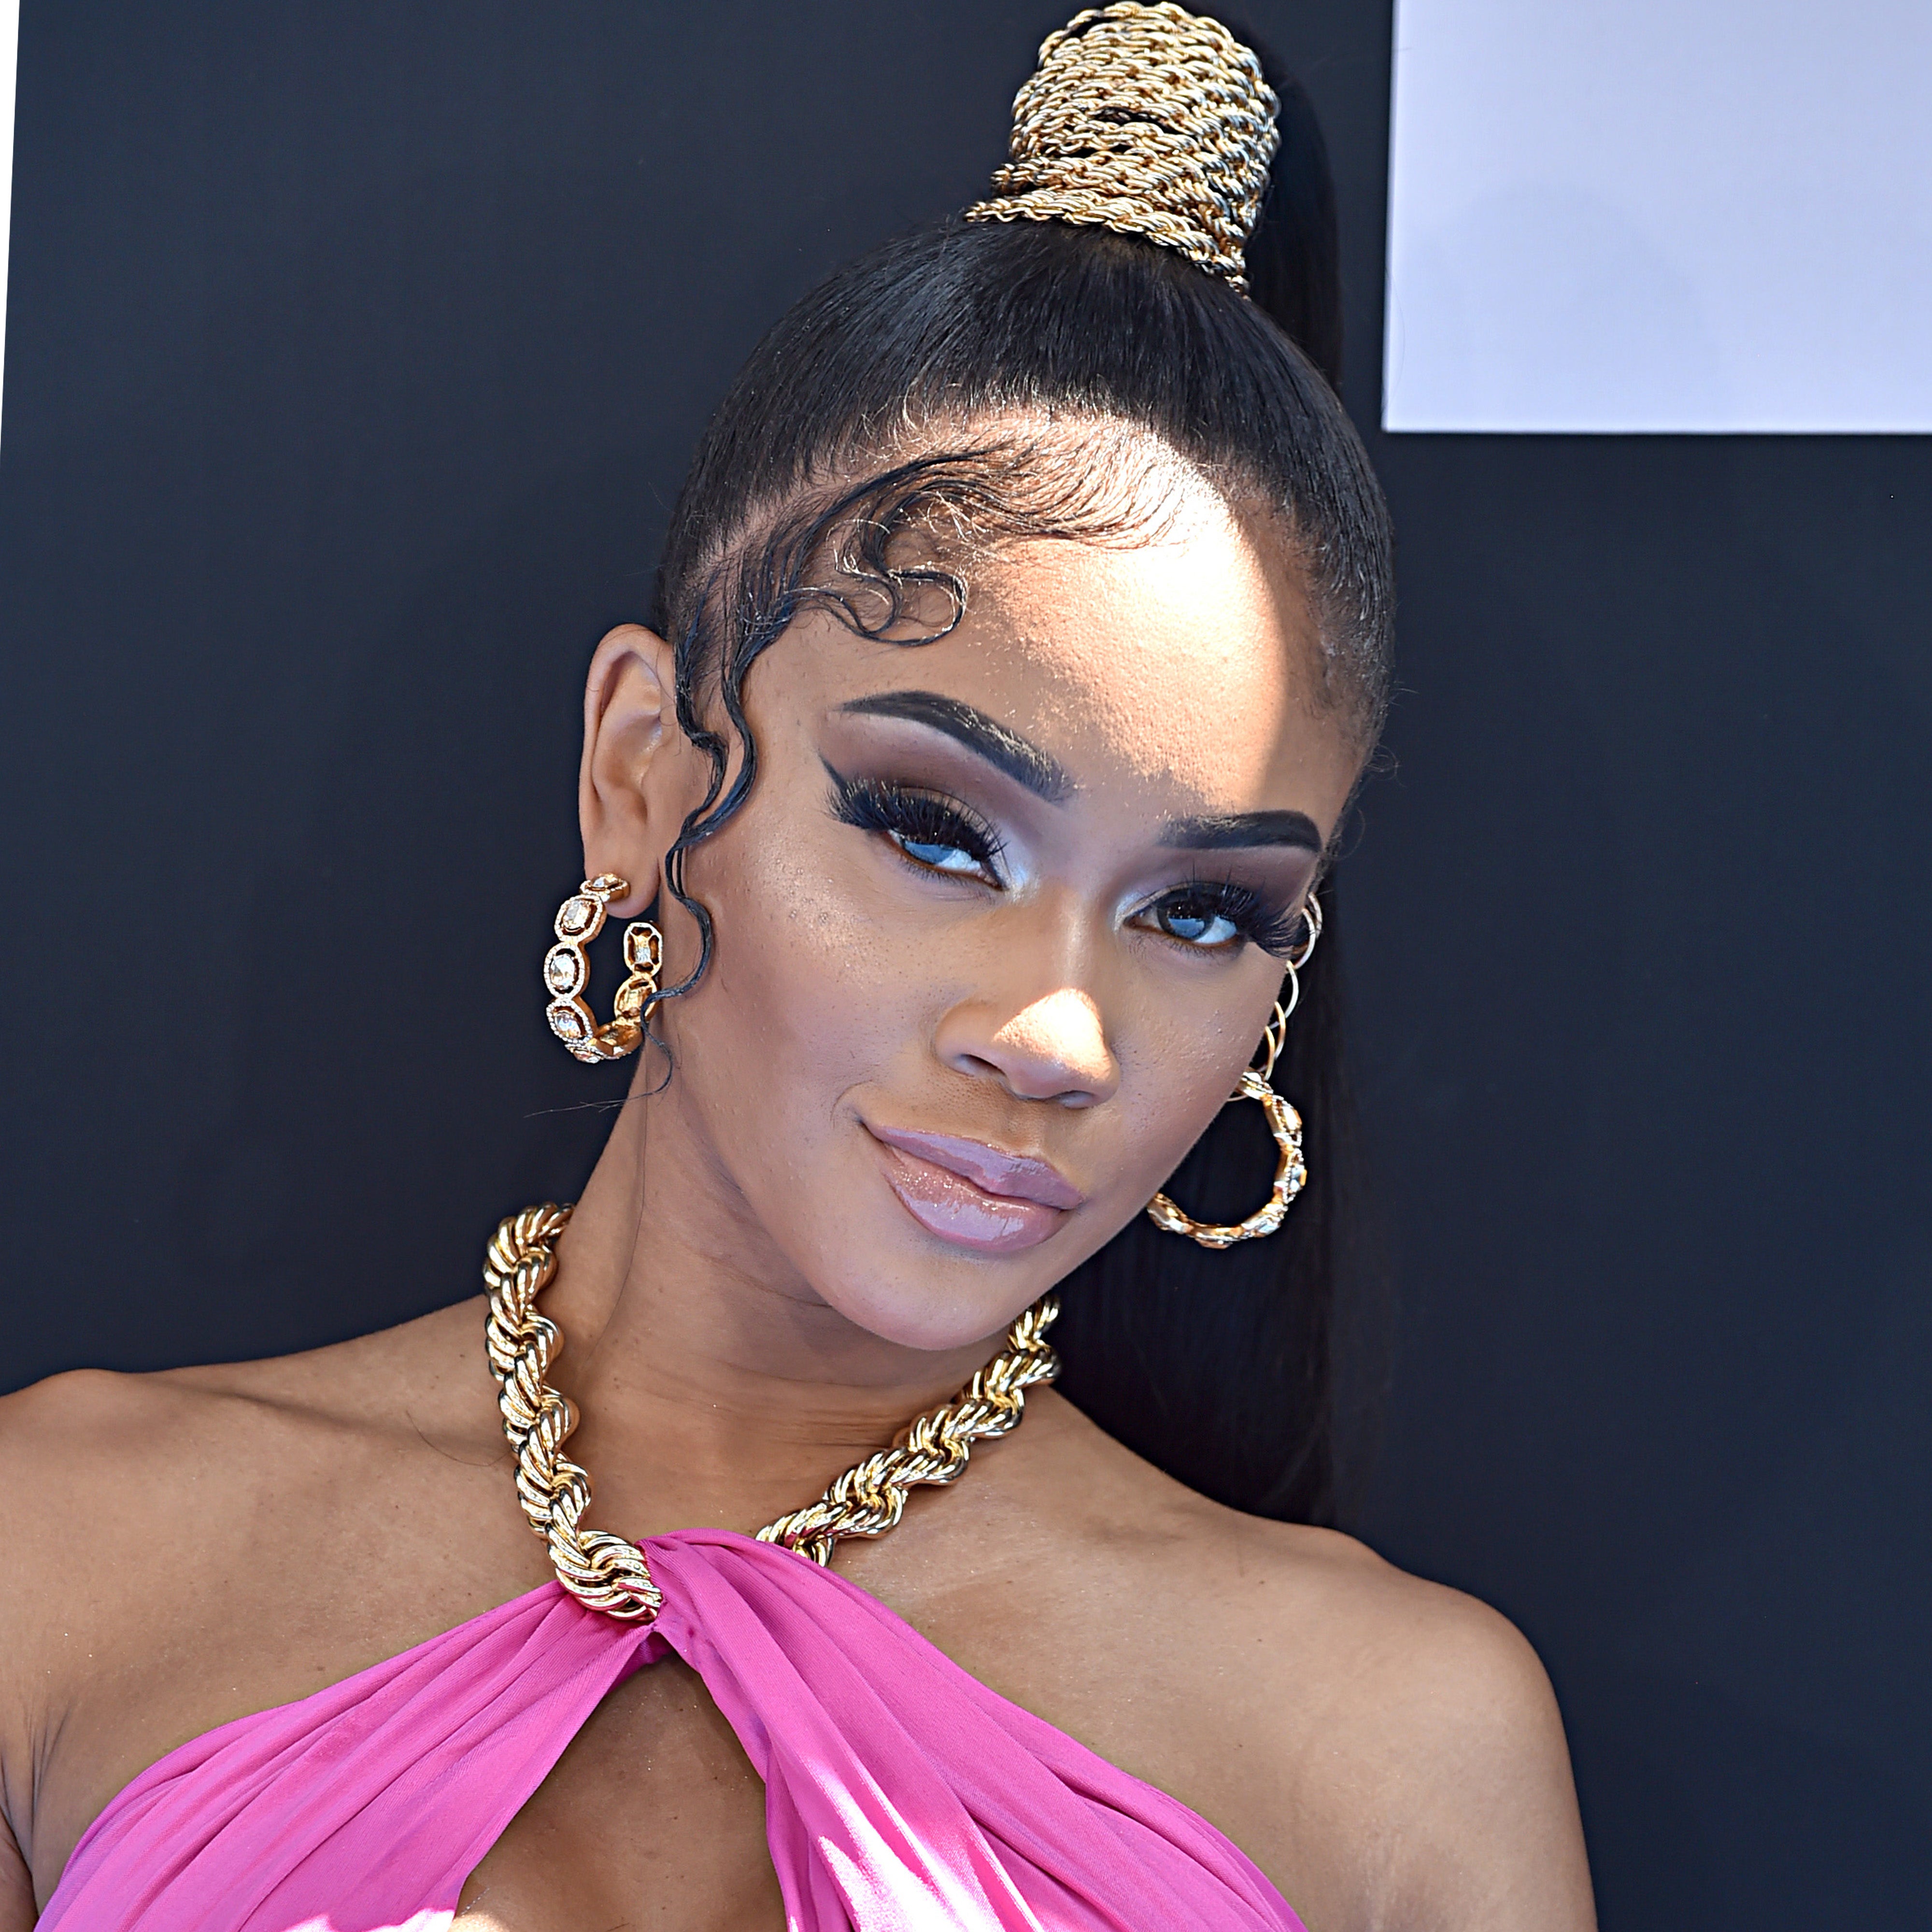 Lip Gloss Was Popping On Blue Carpet At The 2019 BET Awards